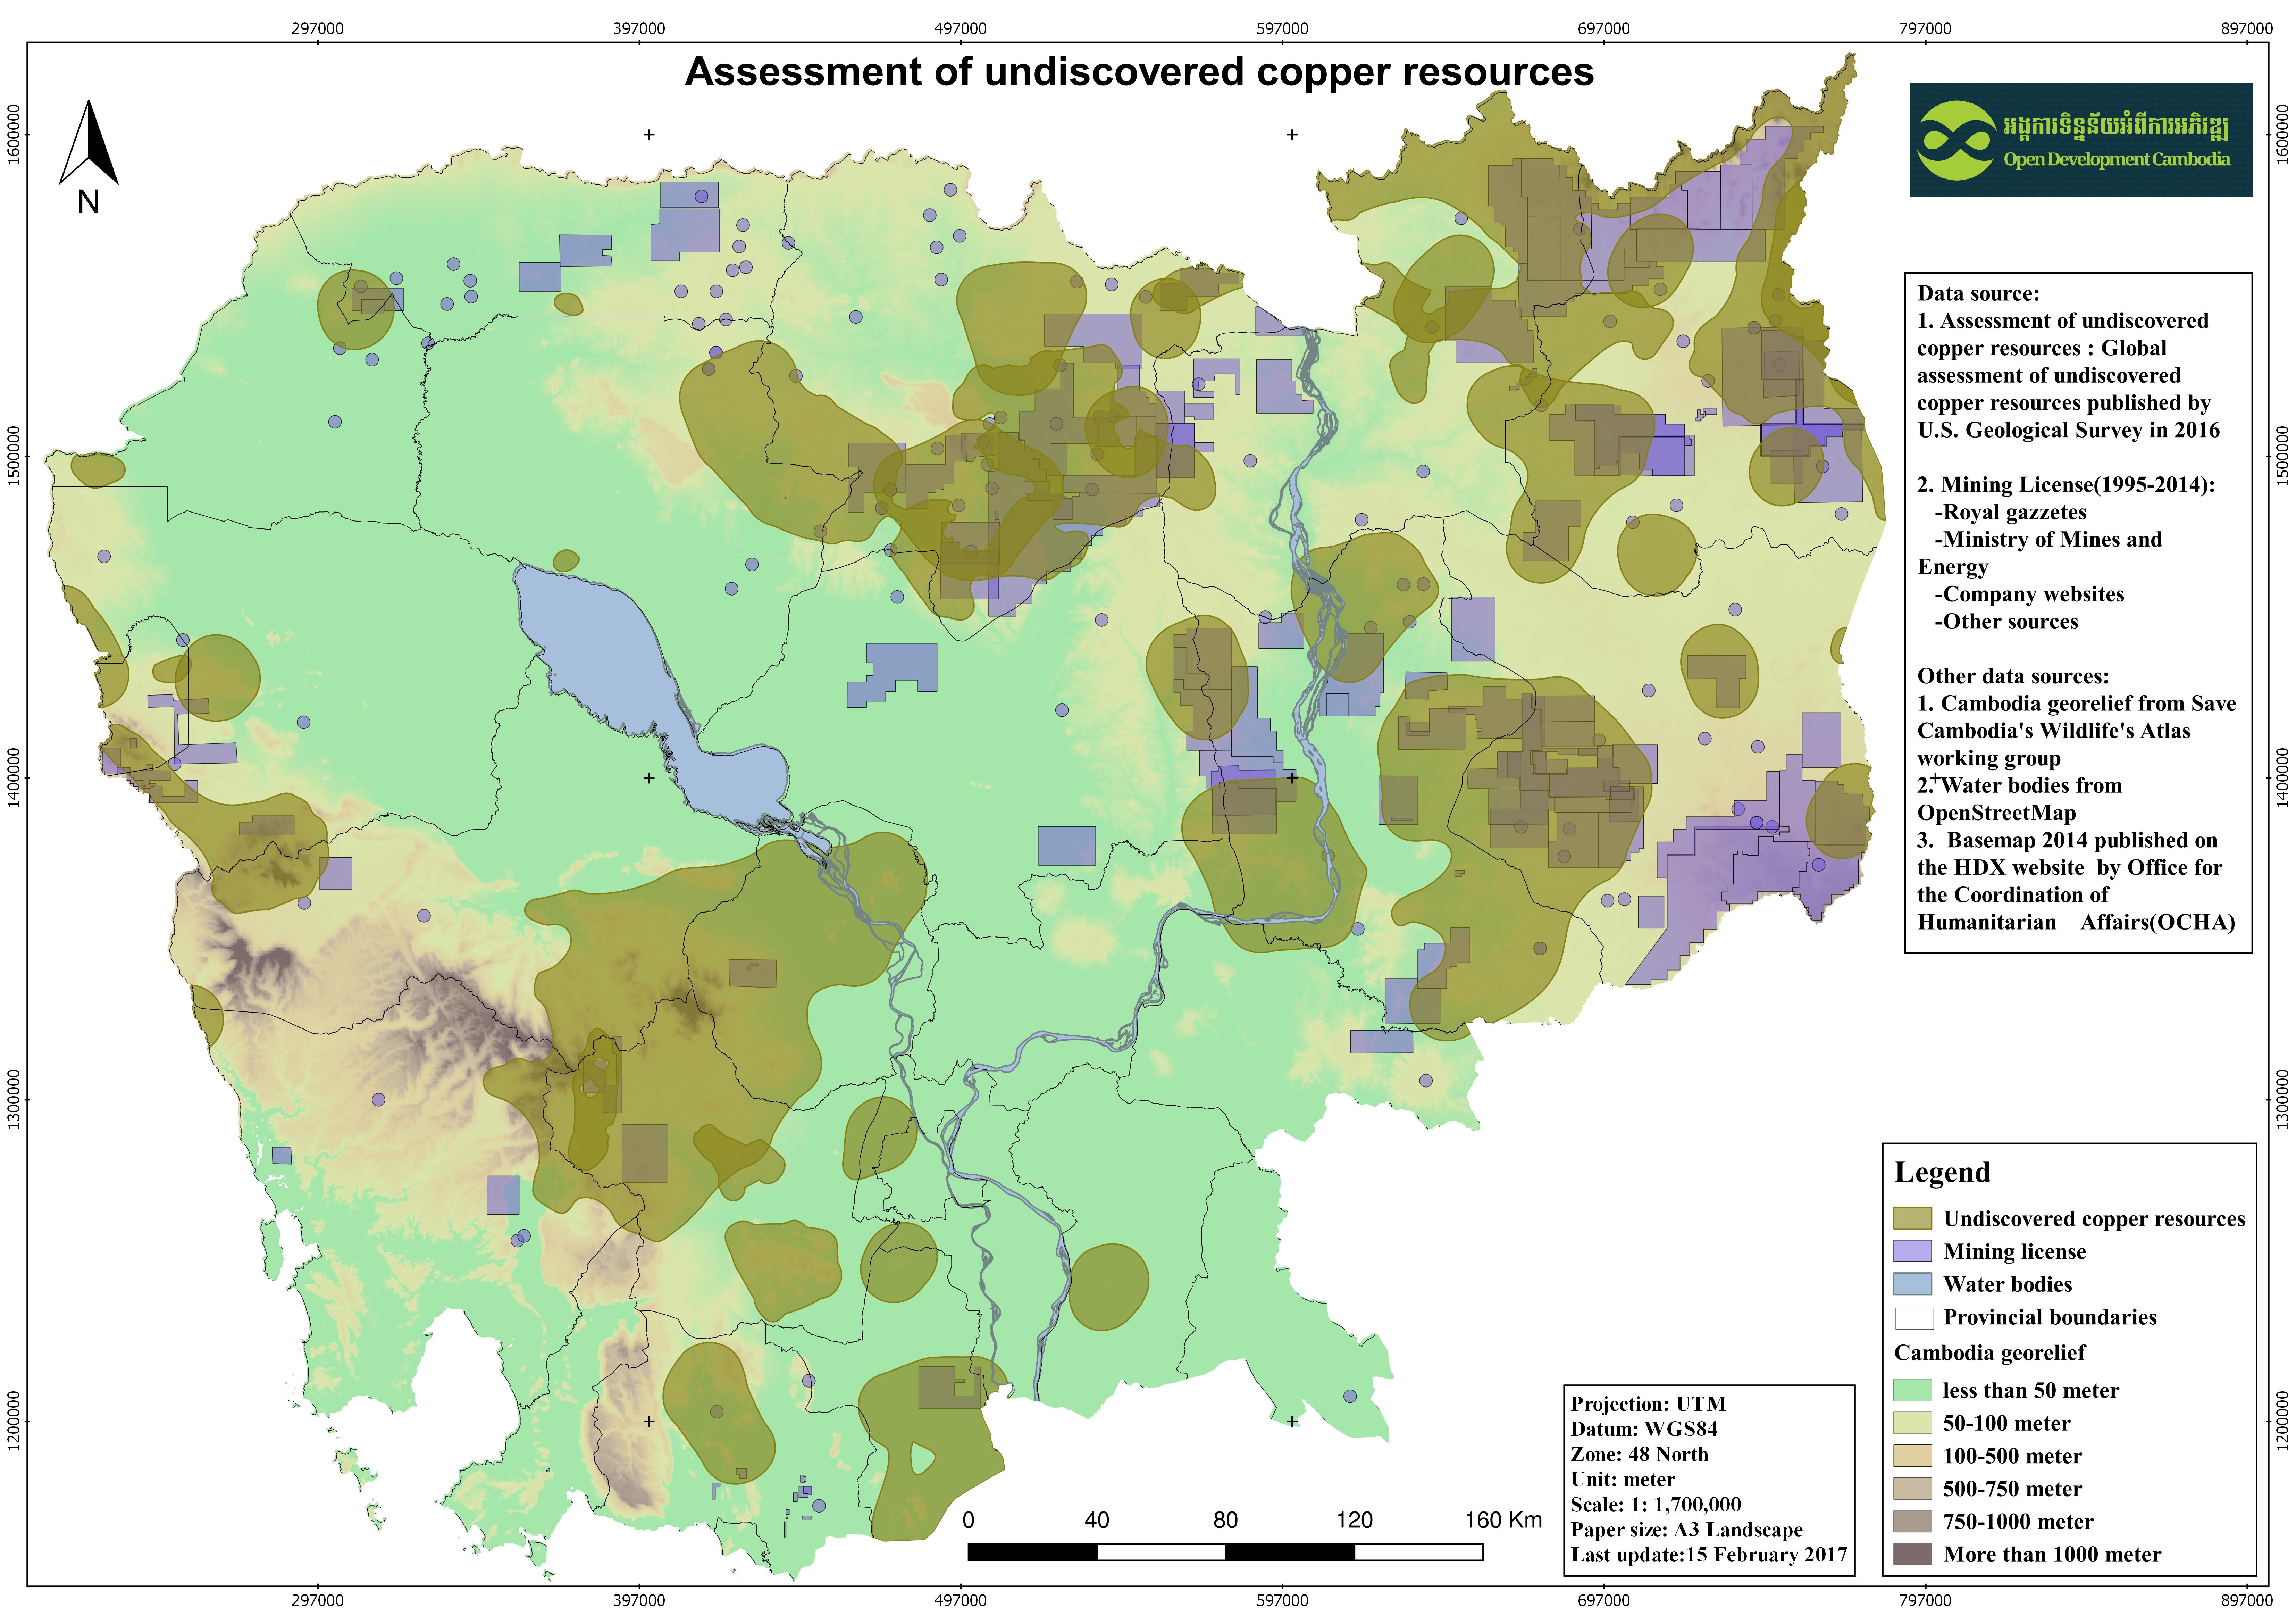 Assessment-of-undiscovered-copper-resources-in-Cambodia